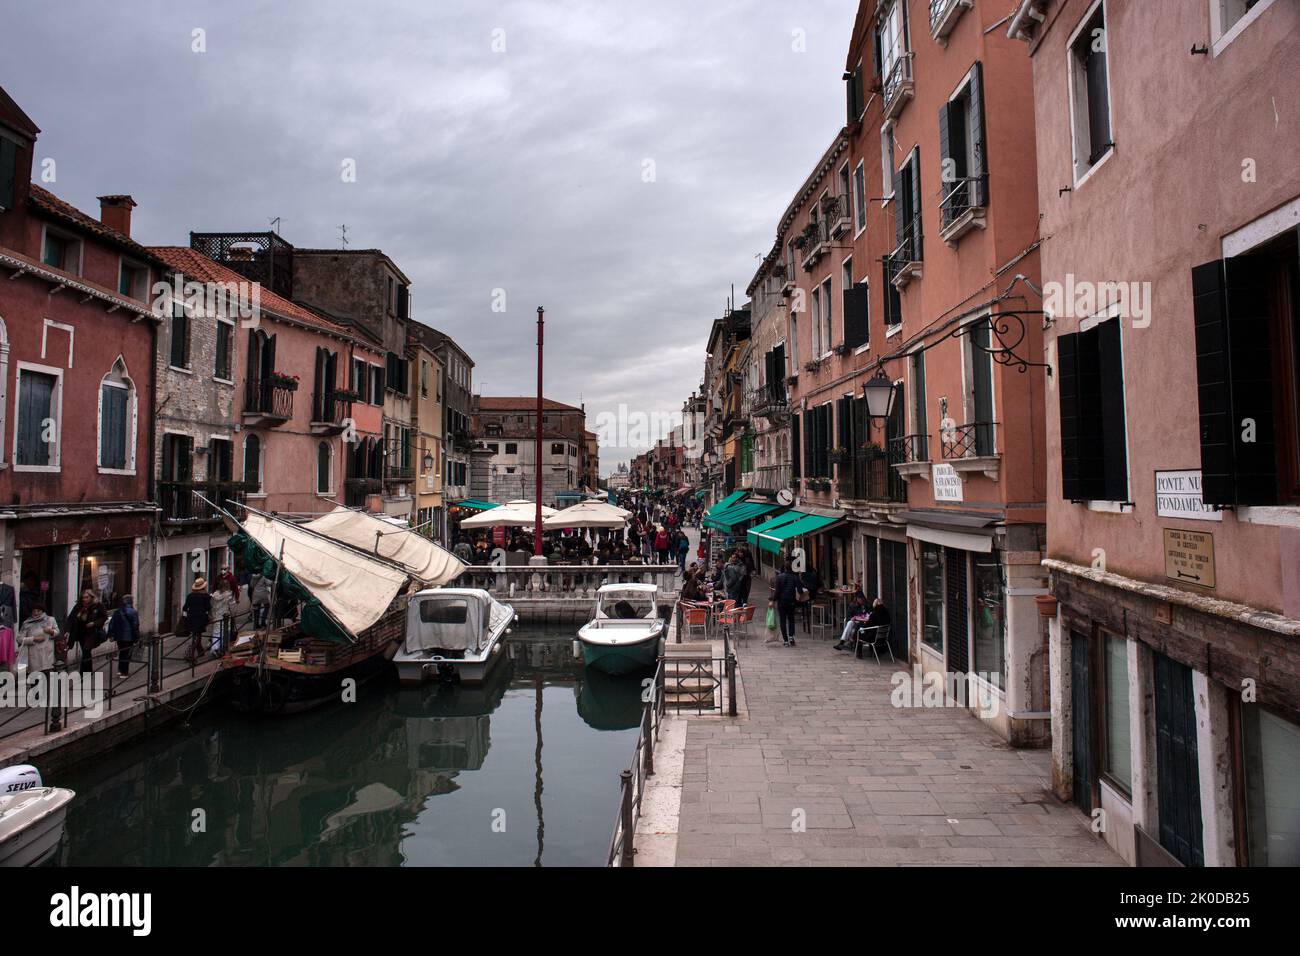 Venice, Italy - April, 21: View of the typical architecture in Venice on April 21, 2022 Stock Photo